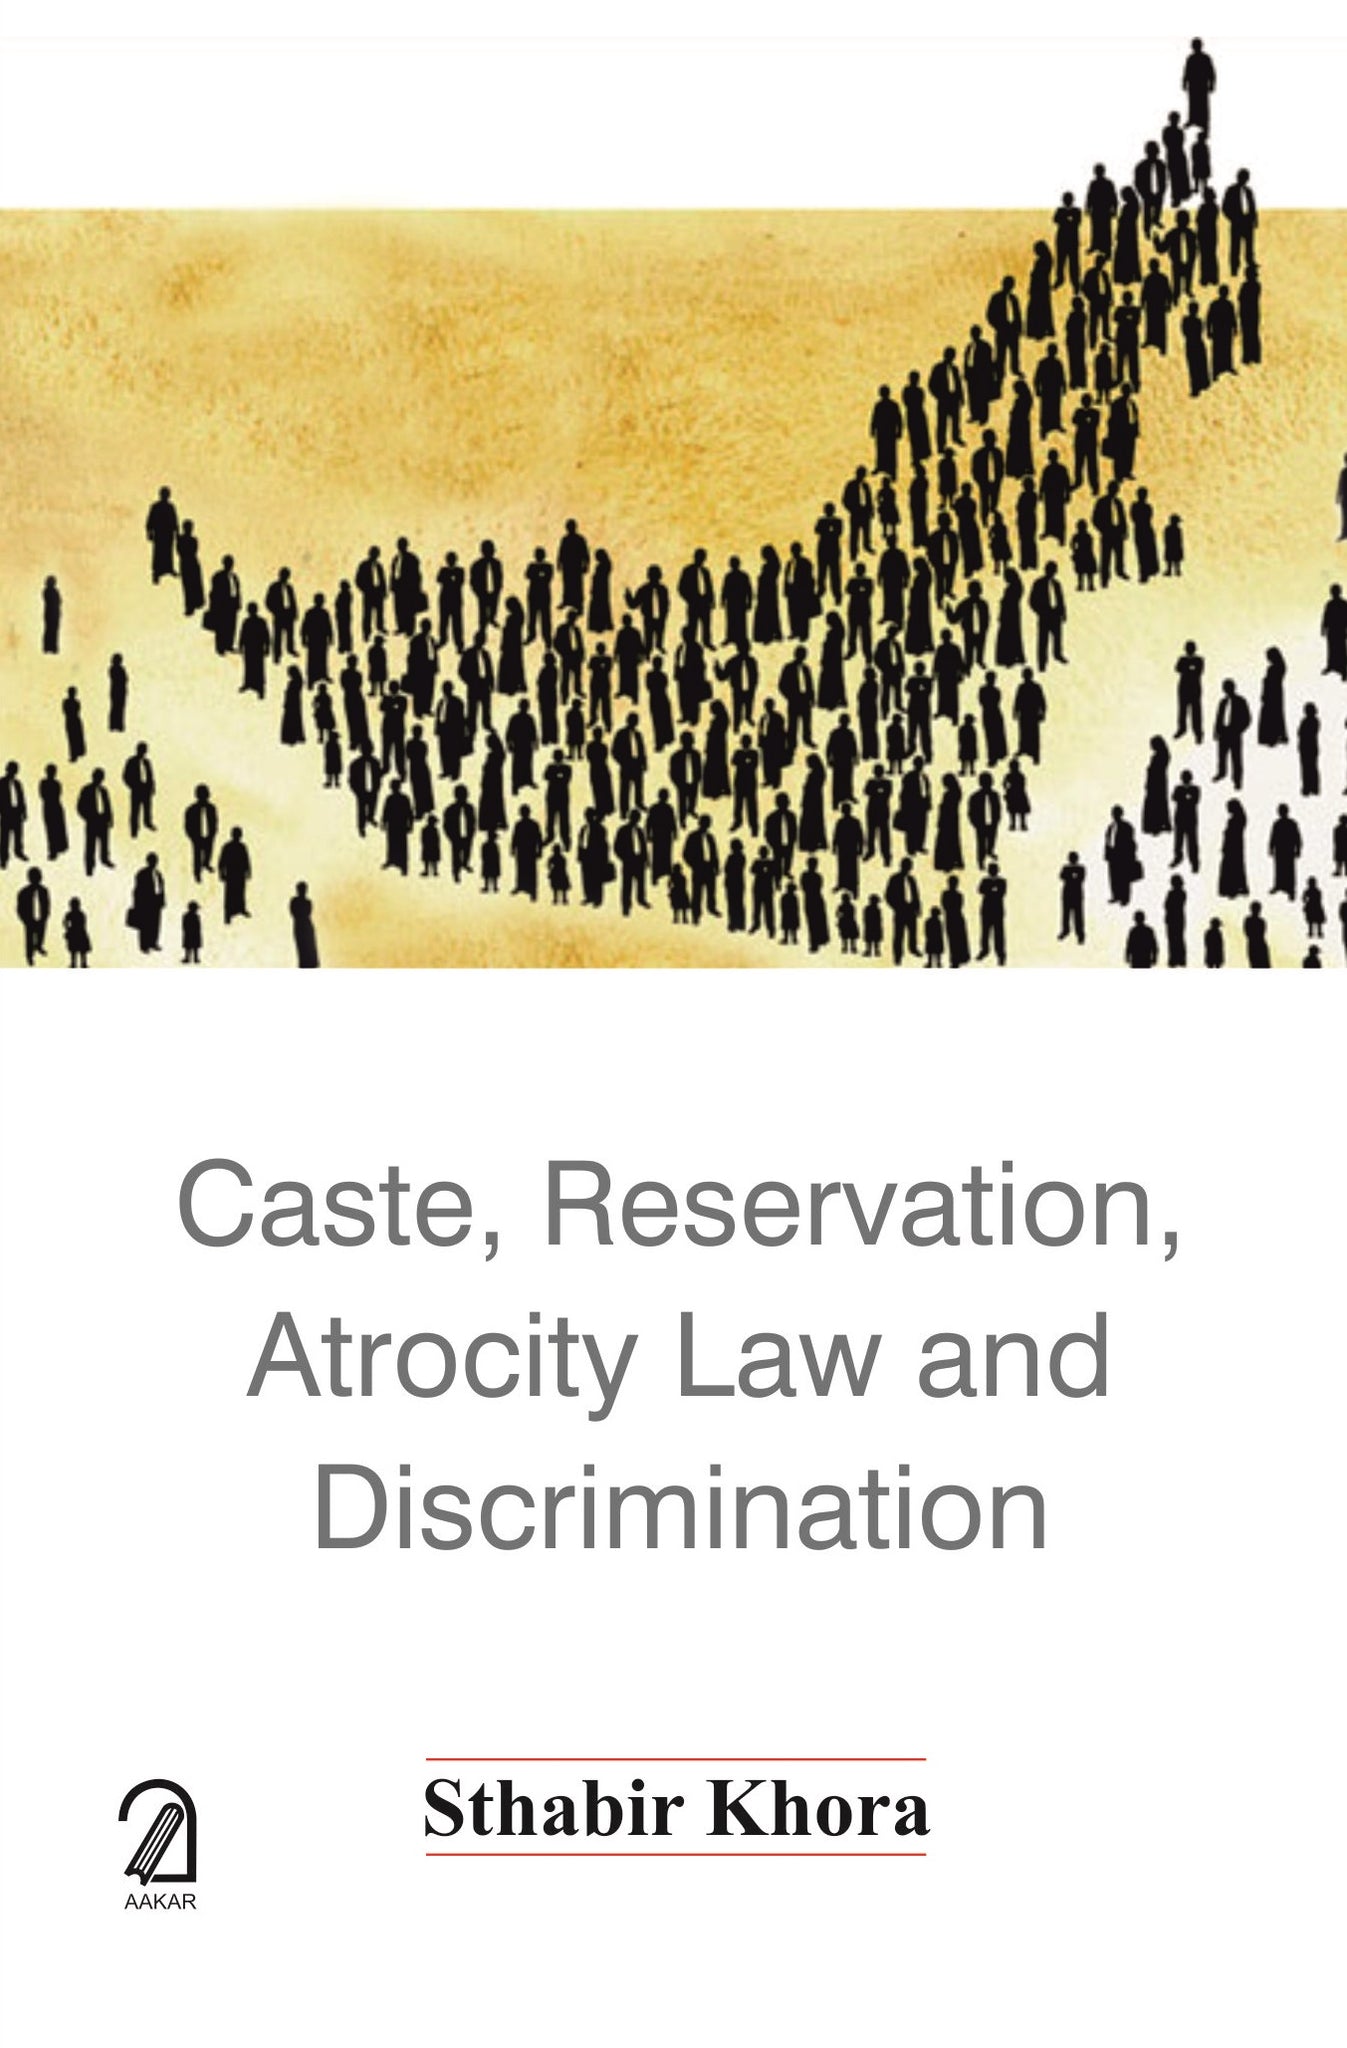 Caste, Reservation, Atrocity Law and Discrimination